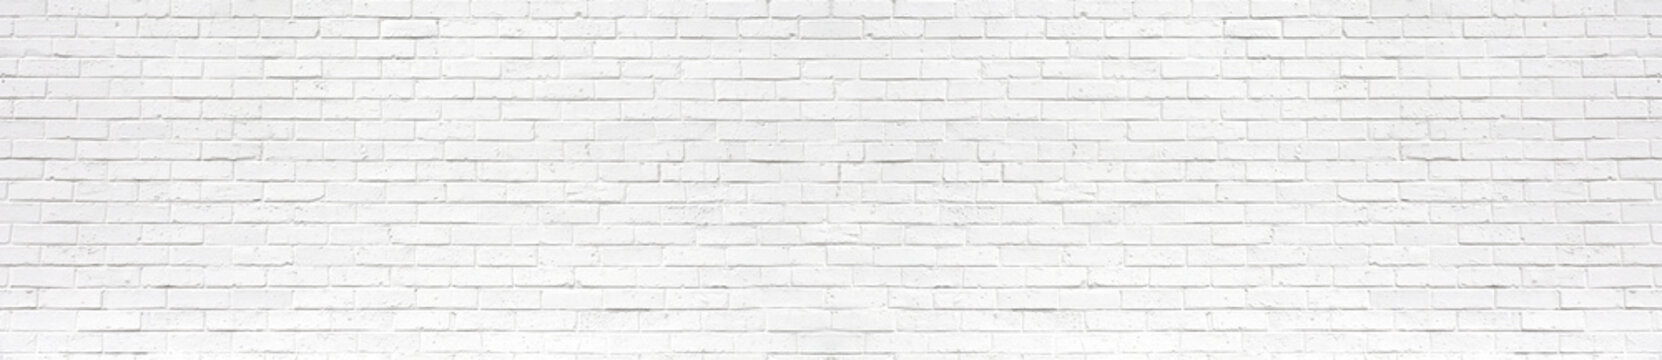 white, old brick wall may used as background